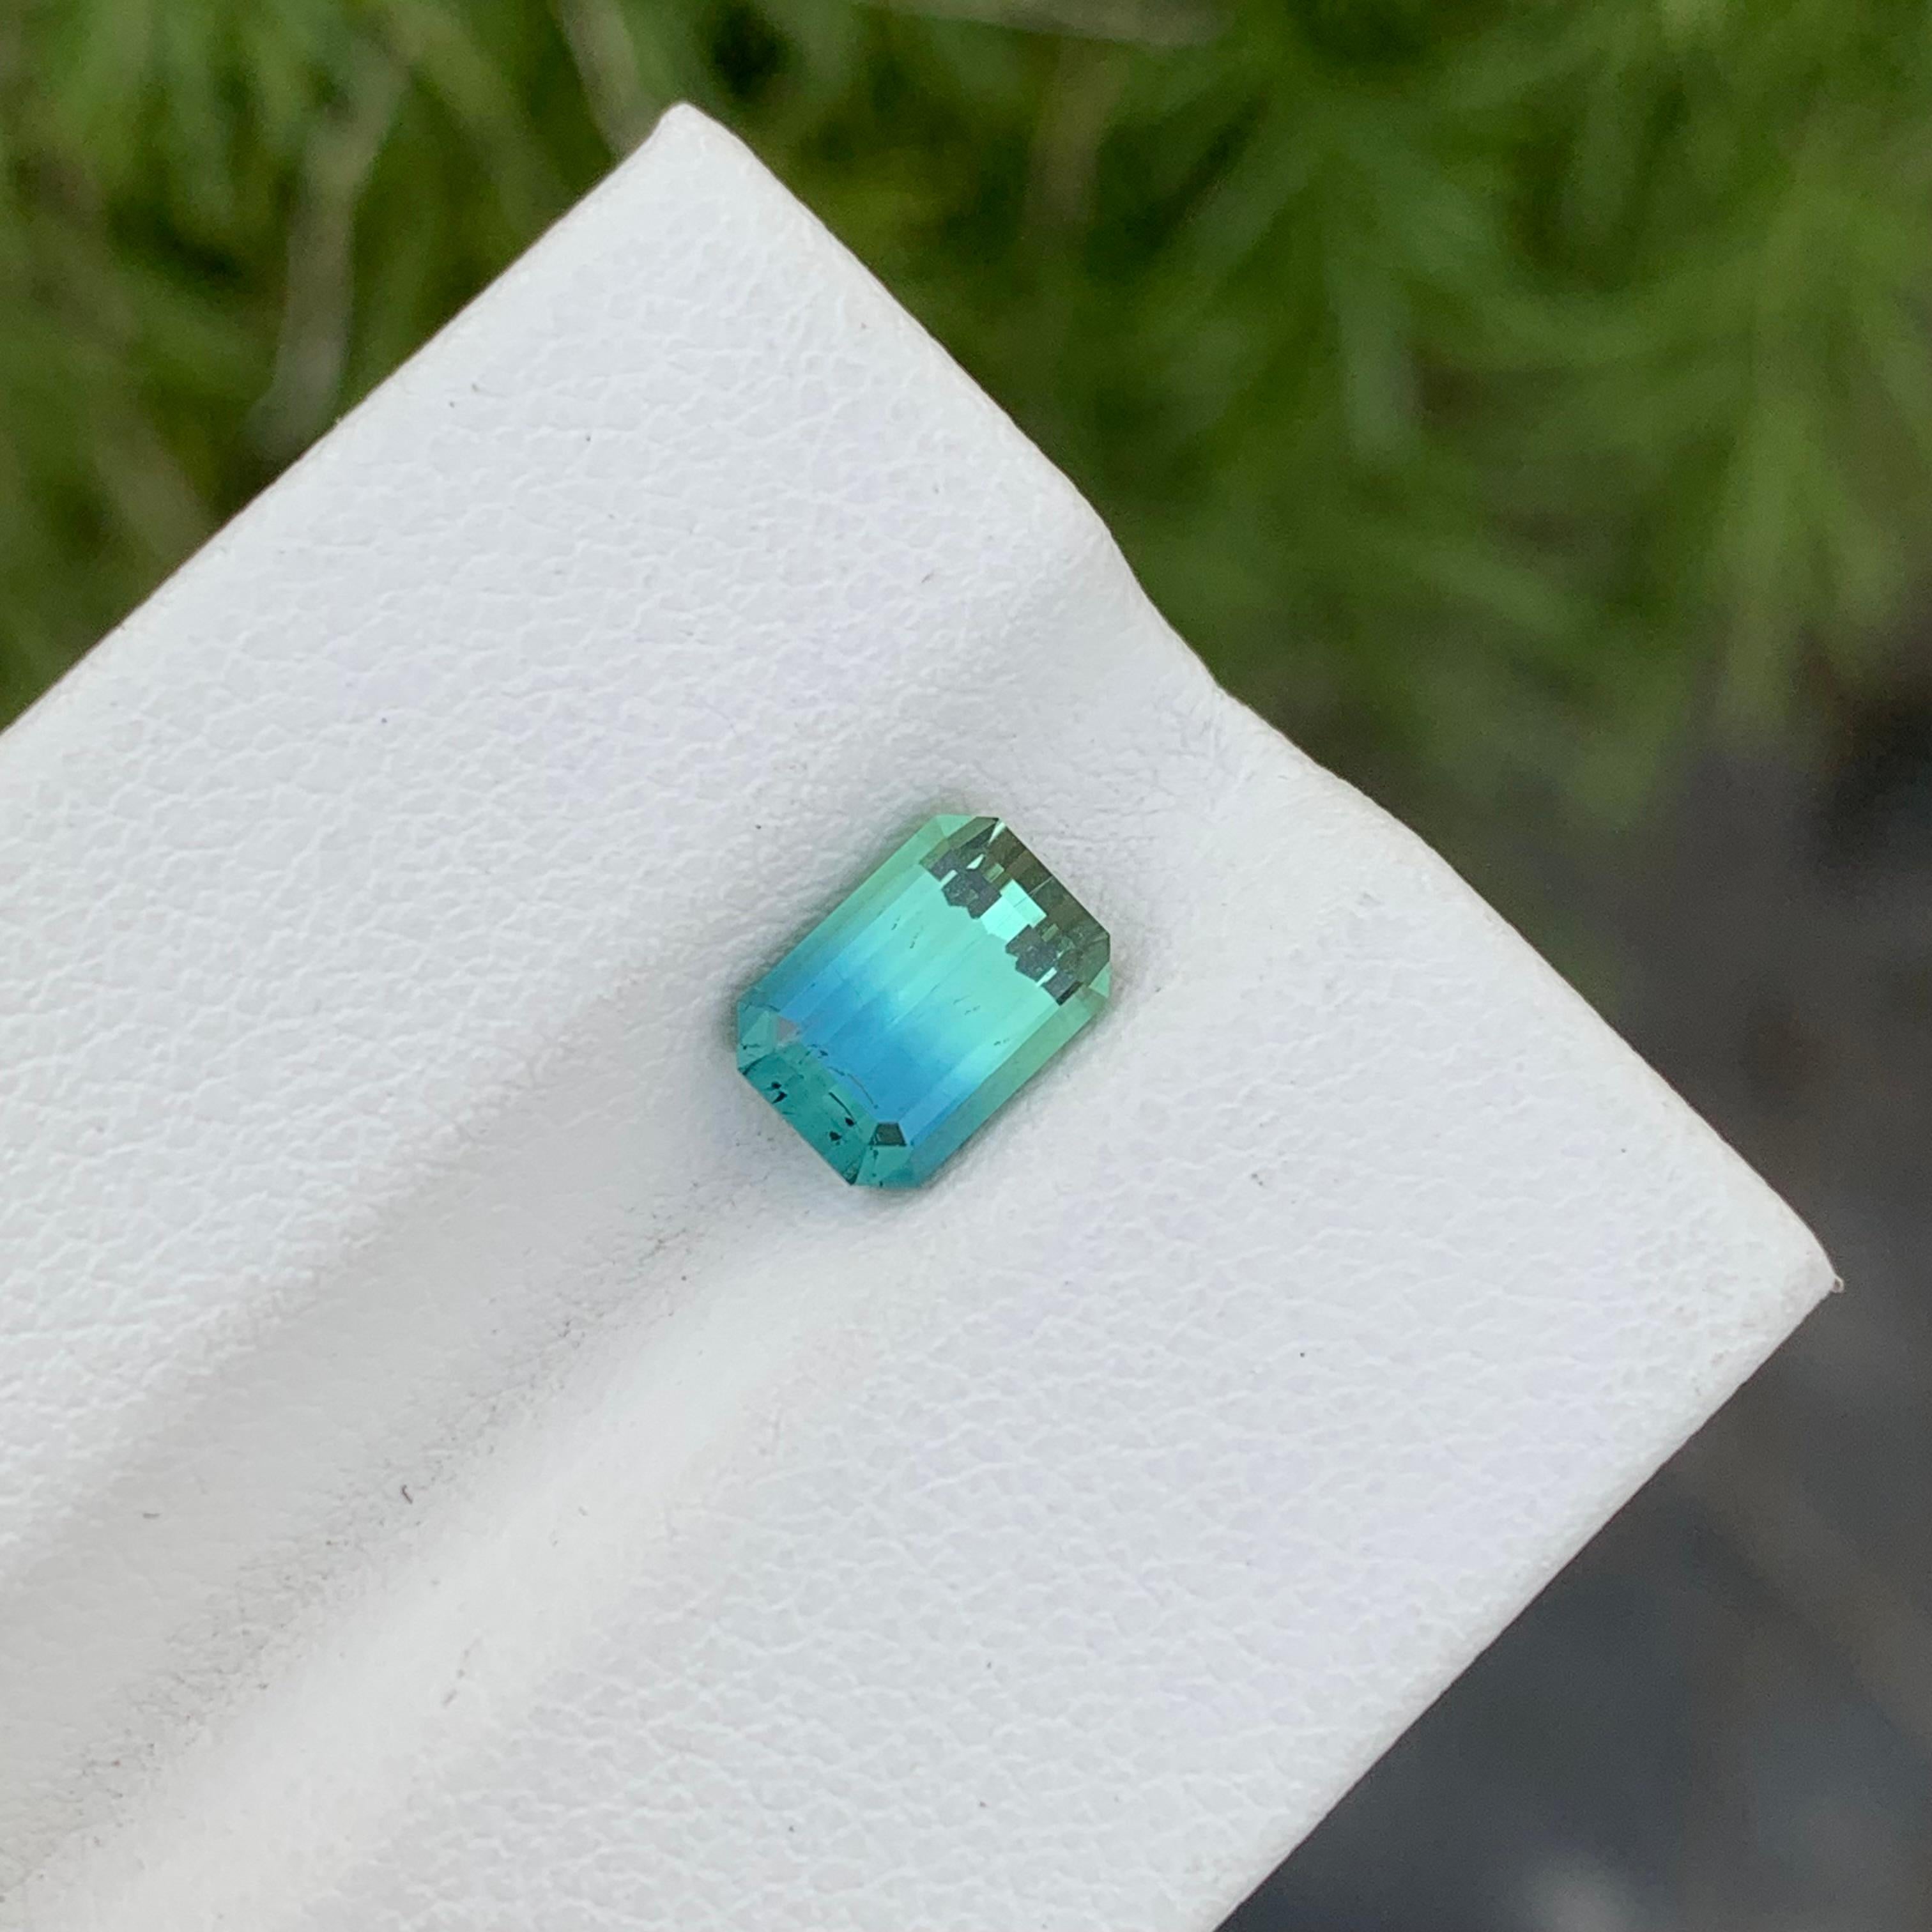 Loose Bi Colour Tourmaline

Weight: 1.35 Carats
Dimension: 7.5 x 5.3 x 3.9 Mm
Colour: Mint Green And Aqua Blue 
Origin: Afghanistan
Certificate: On Demand
Treatment: Non

Tourmaline is a captivating gemstone known for its remarkable variety of